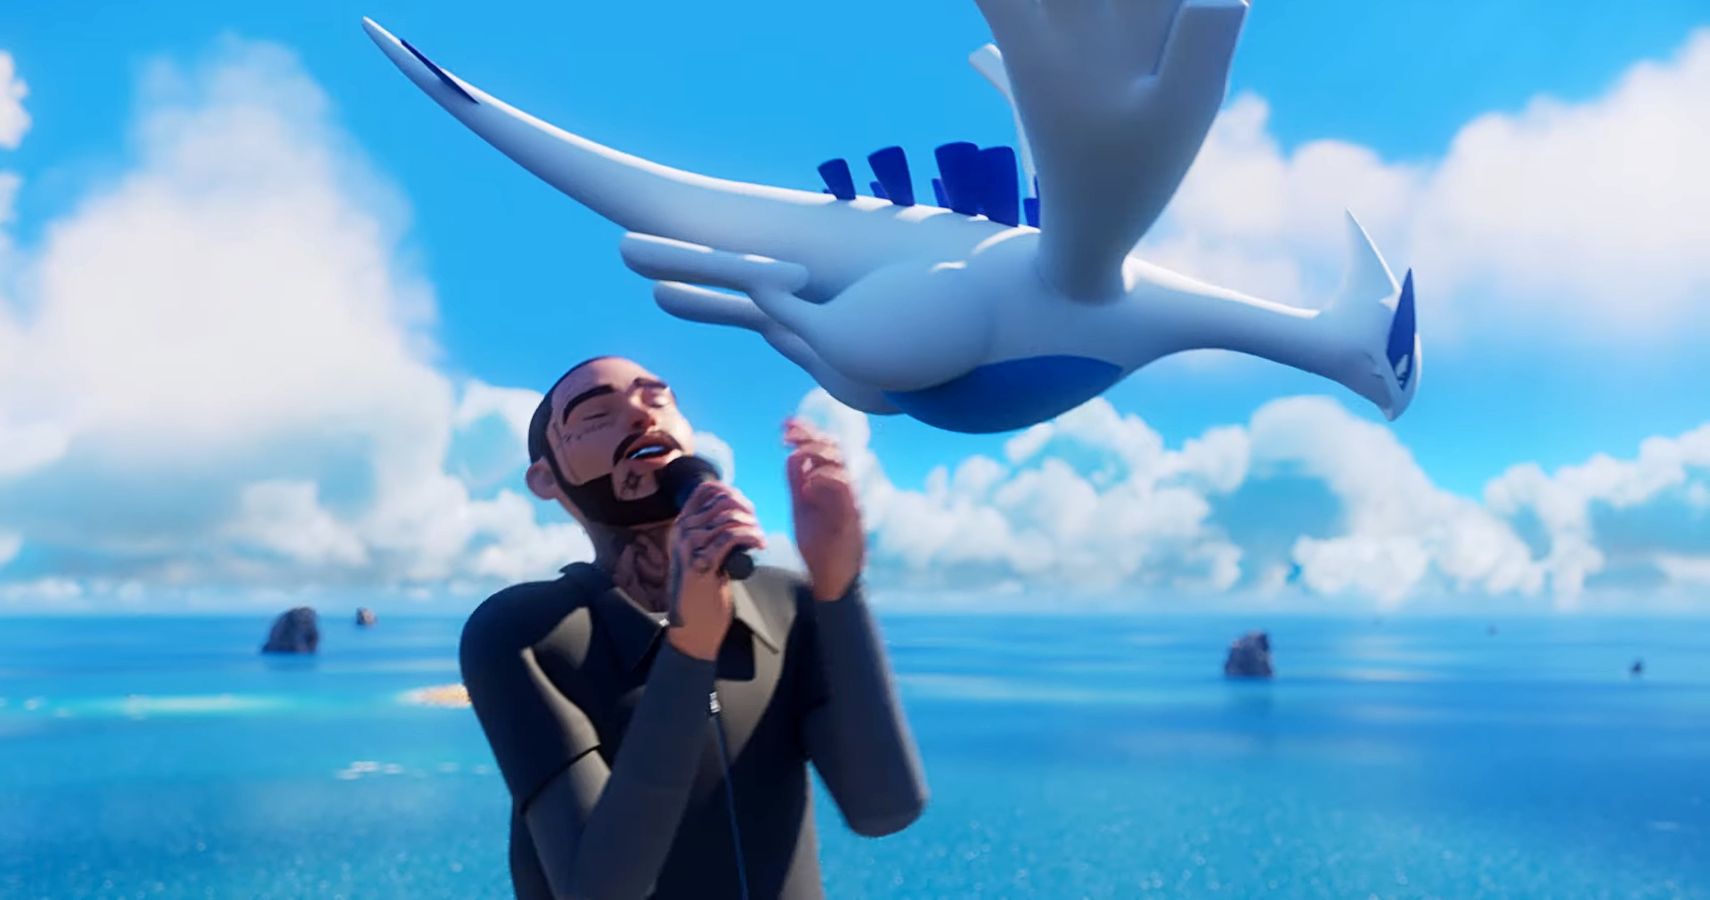 Post Malone's Pokemon Concert Lands A Critical Hit With More Music From Katy Perry and J Balvin Coming This Fall